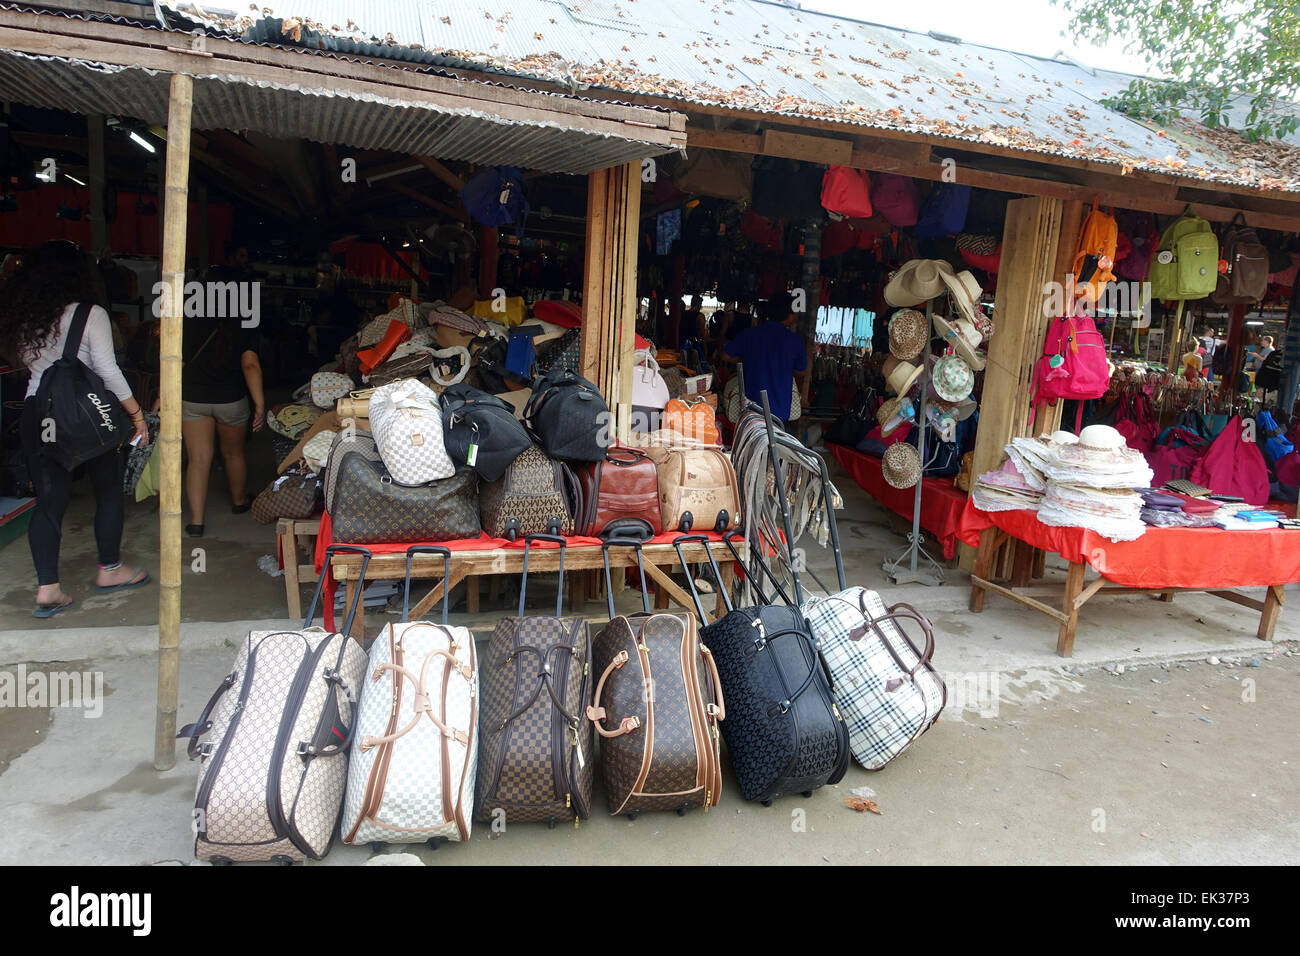 Counterfeit brand products, such as bags and suitcases, are sold on a marketplace in Don Sao, Laos, 25 February 2015. Photo: Alexandra Schuler/dpa - NO WIRE SERVICE - Stock Photo